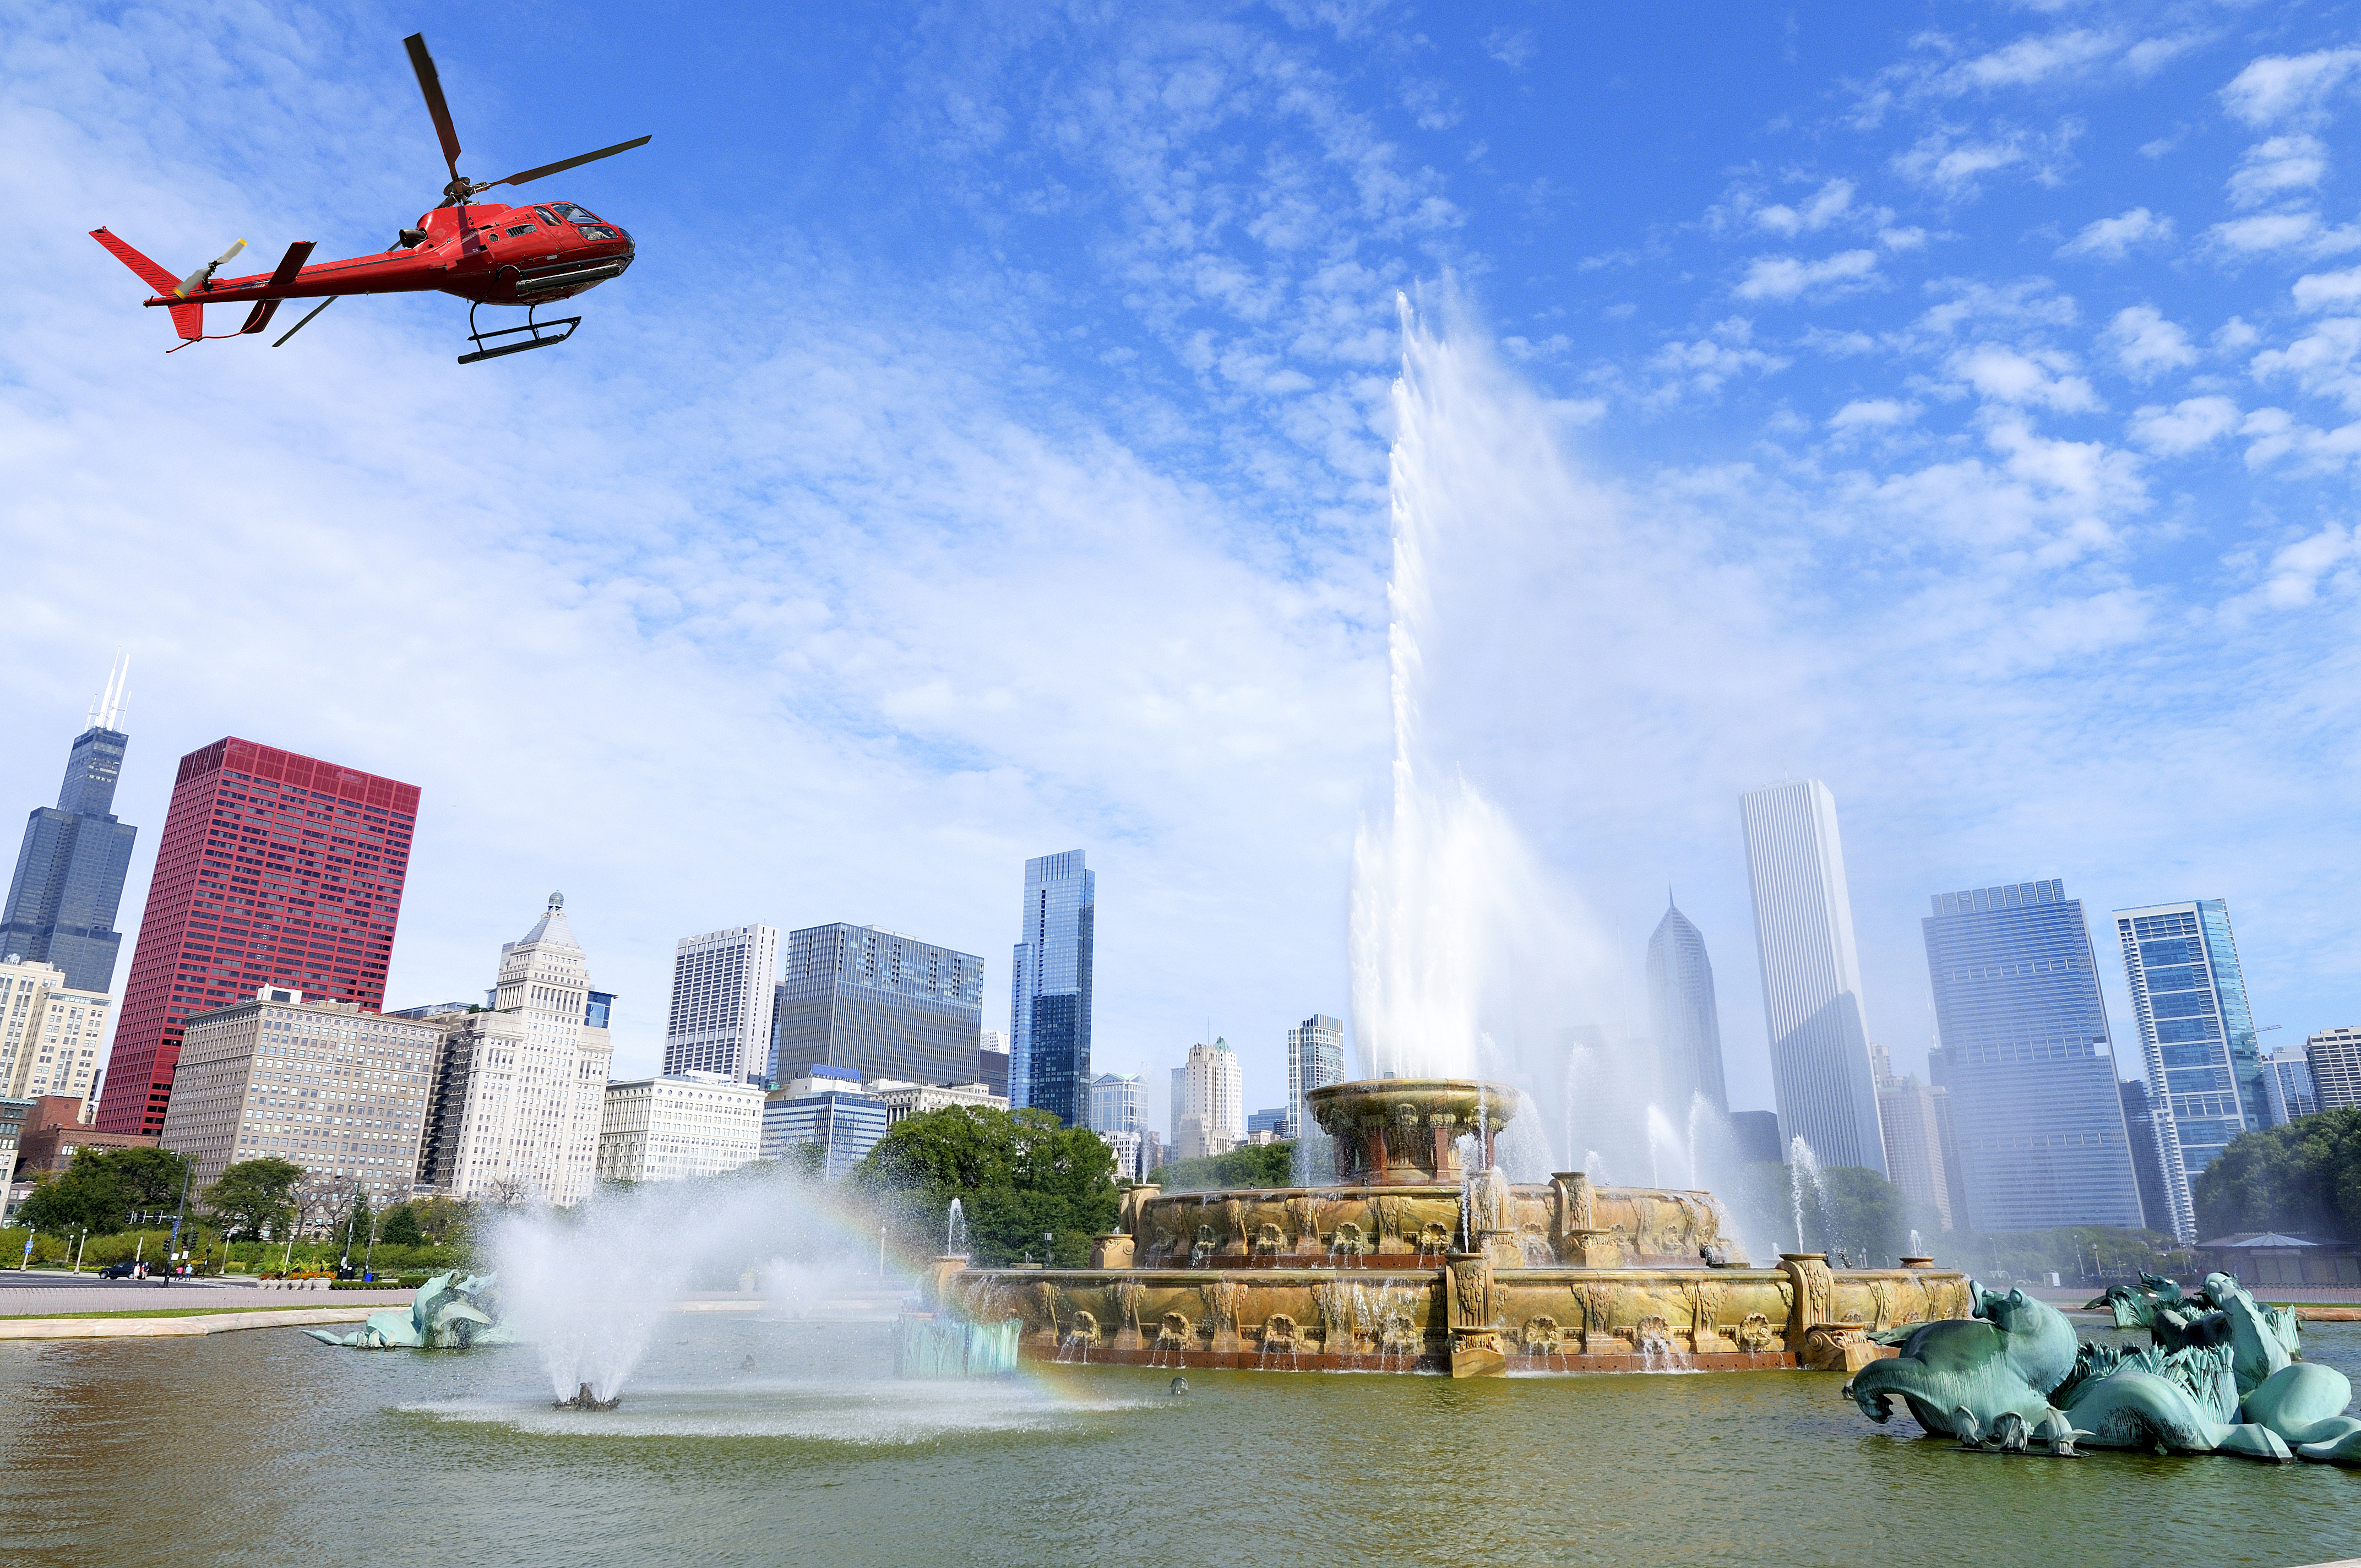 https://res.cloudinary.com/see-sight-tours/image/upload/v1619811846/buckingham-fountain-chicago.jpg